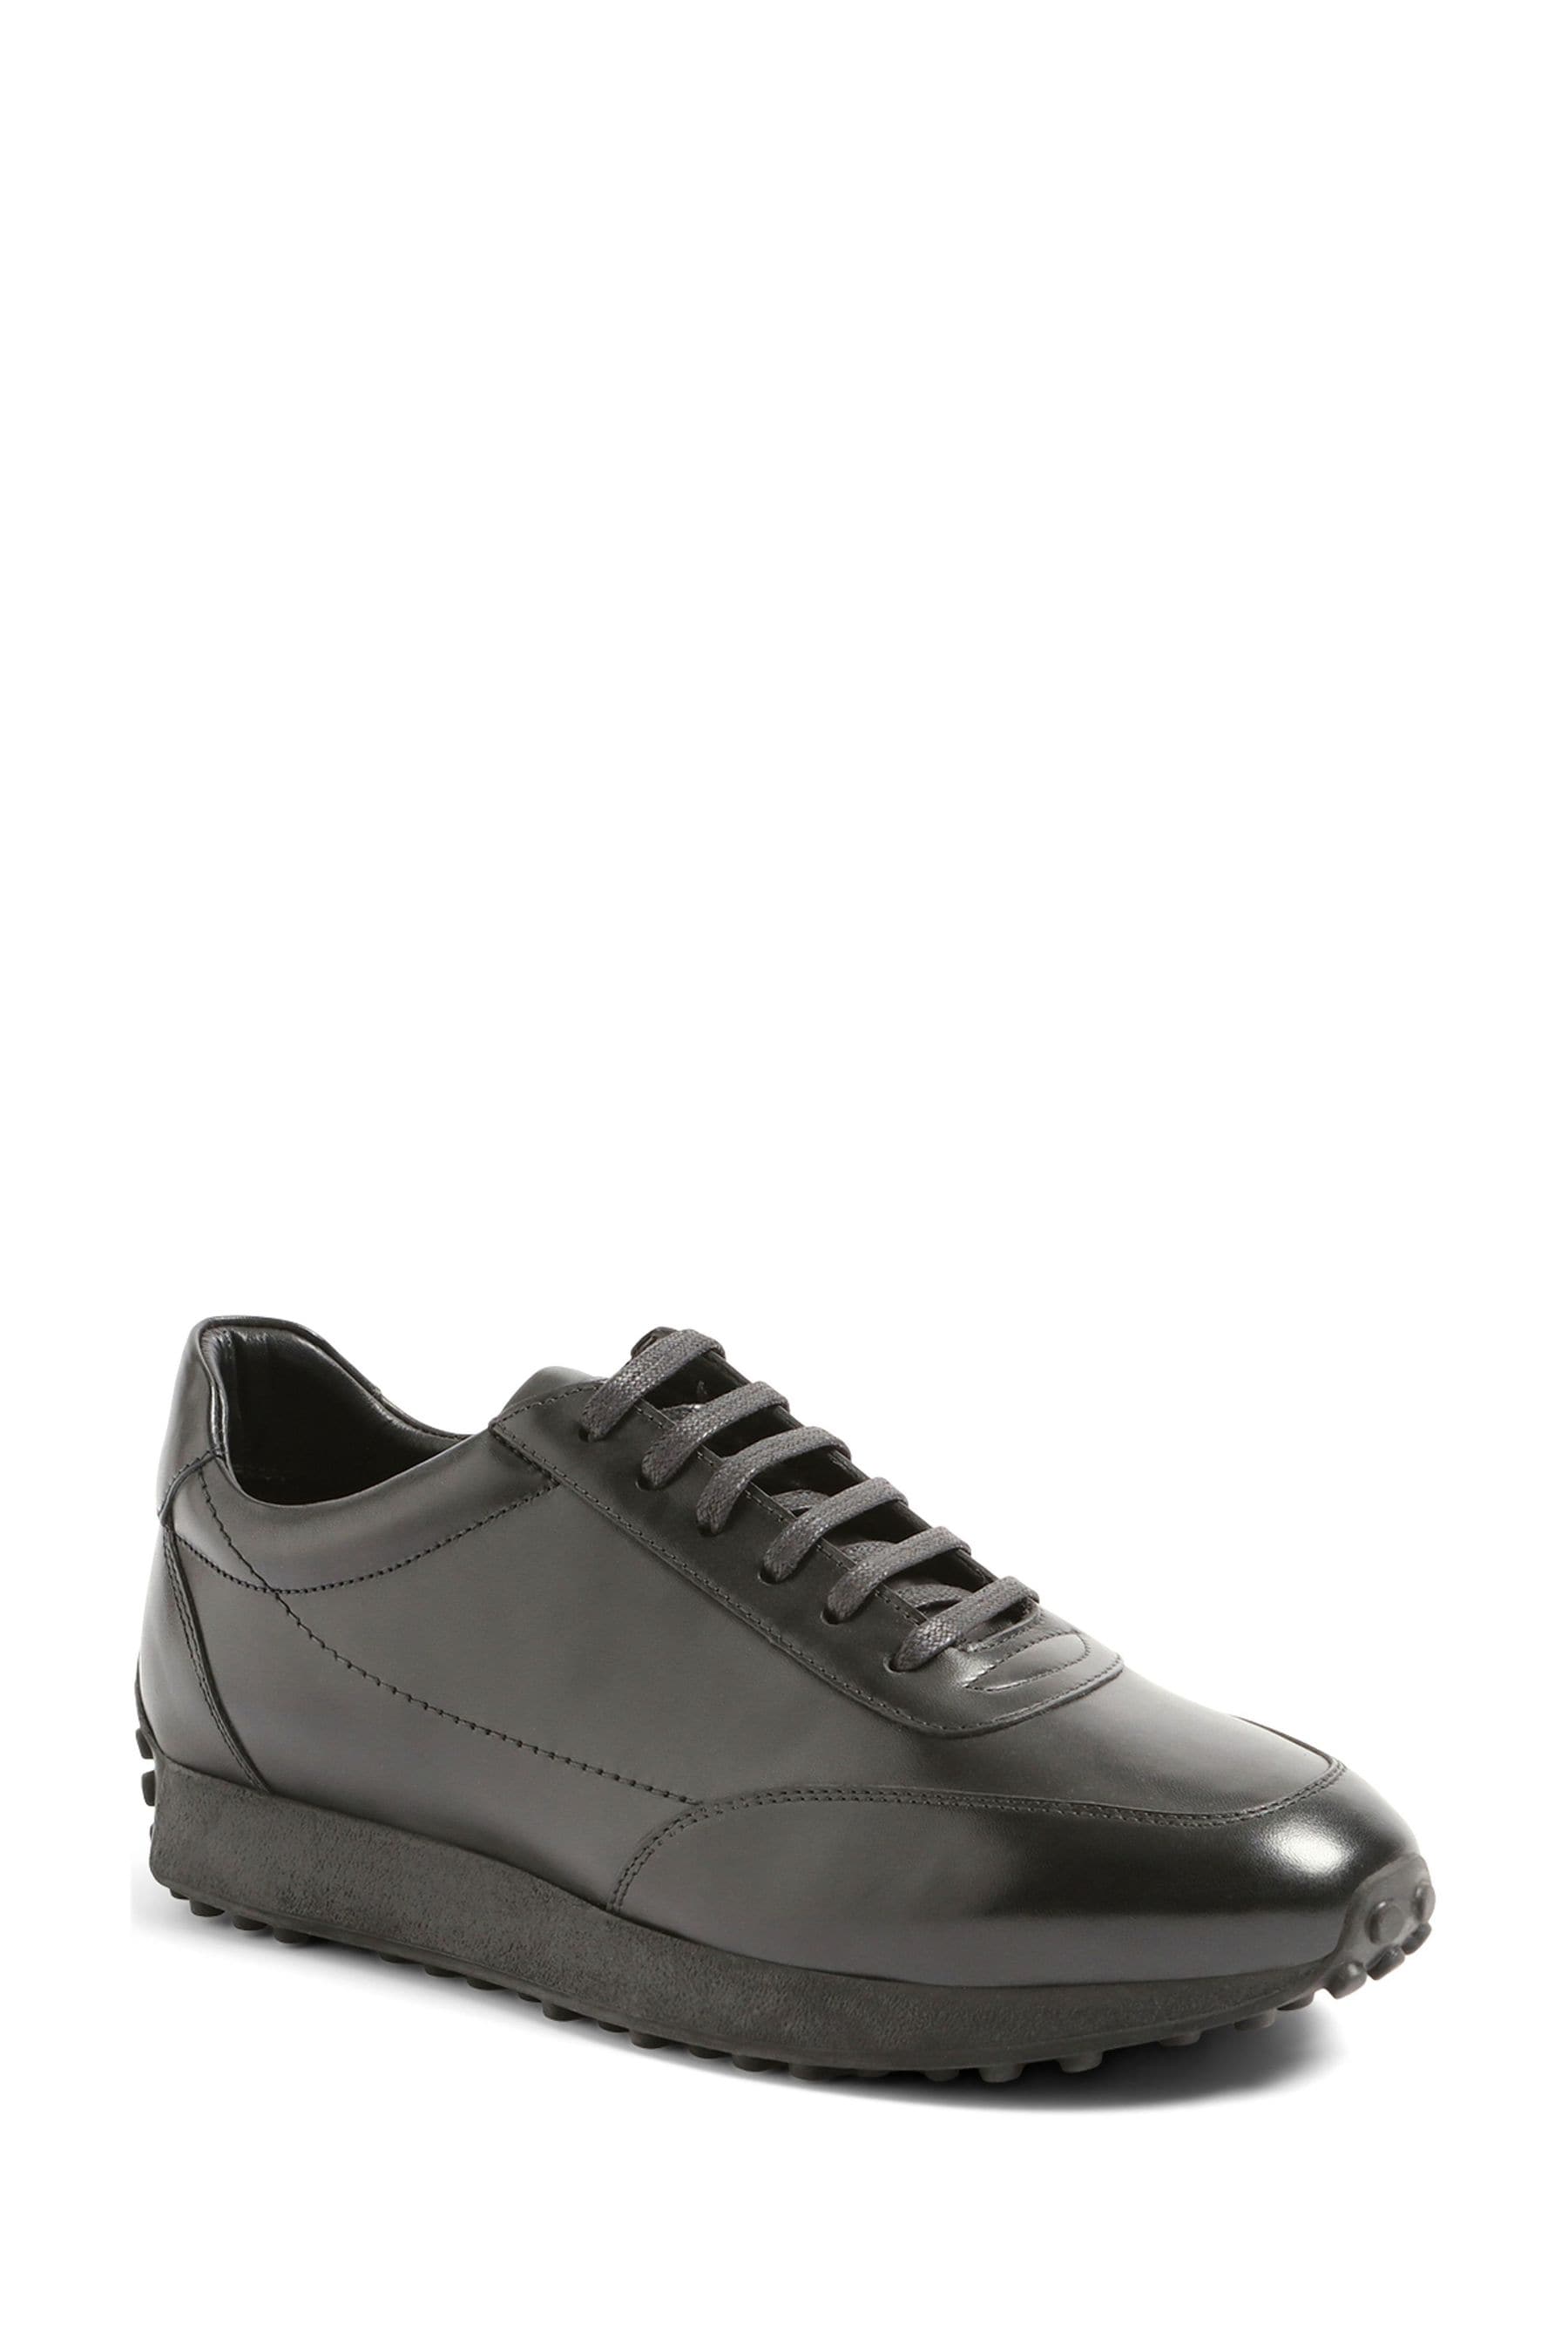 Buy Jones Bootmaker Southend Smart Leather Black Trainers from the Next ...